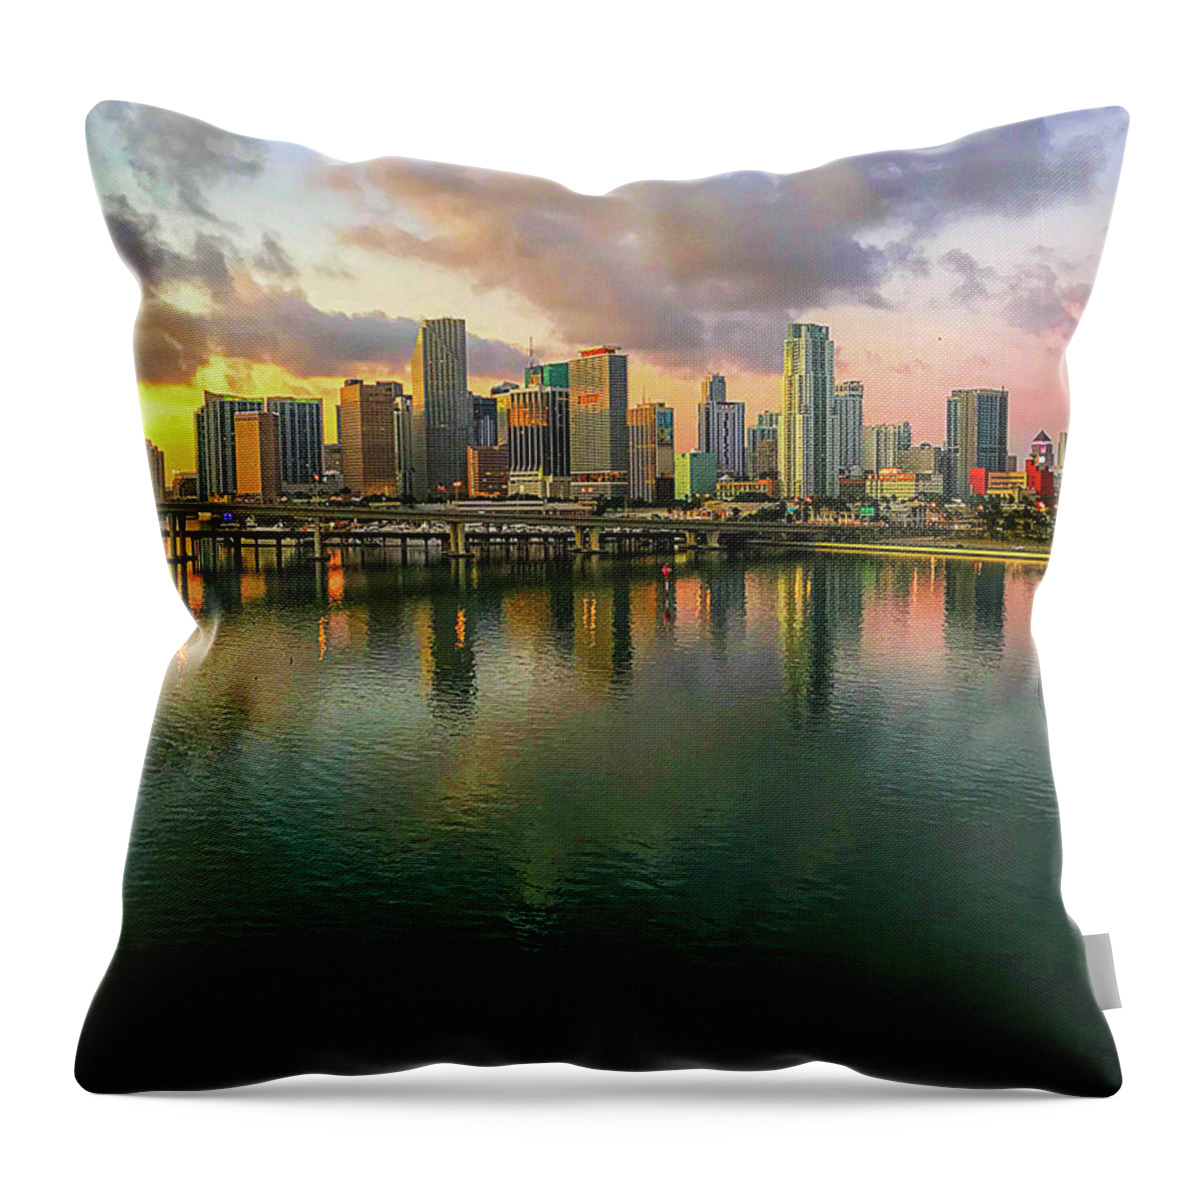 Miami Throw Pillow featuring the photograph Miami Skyline at Sunrise by Bill Barber